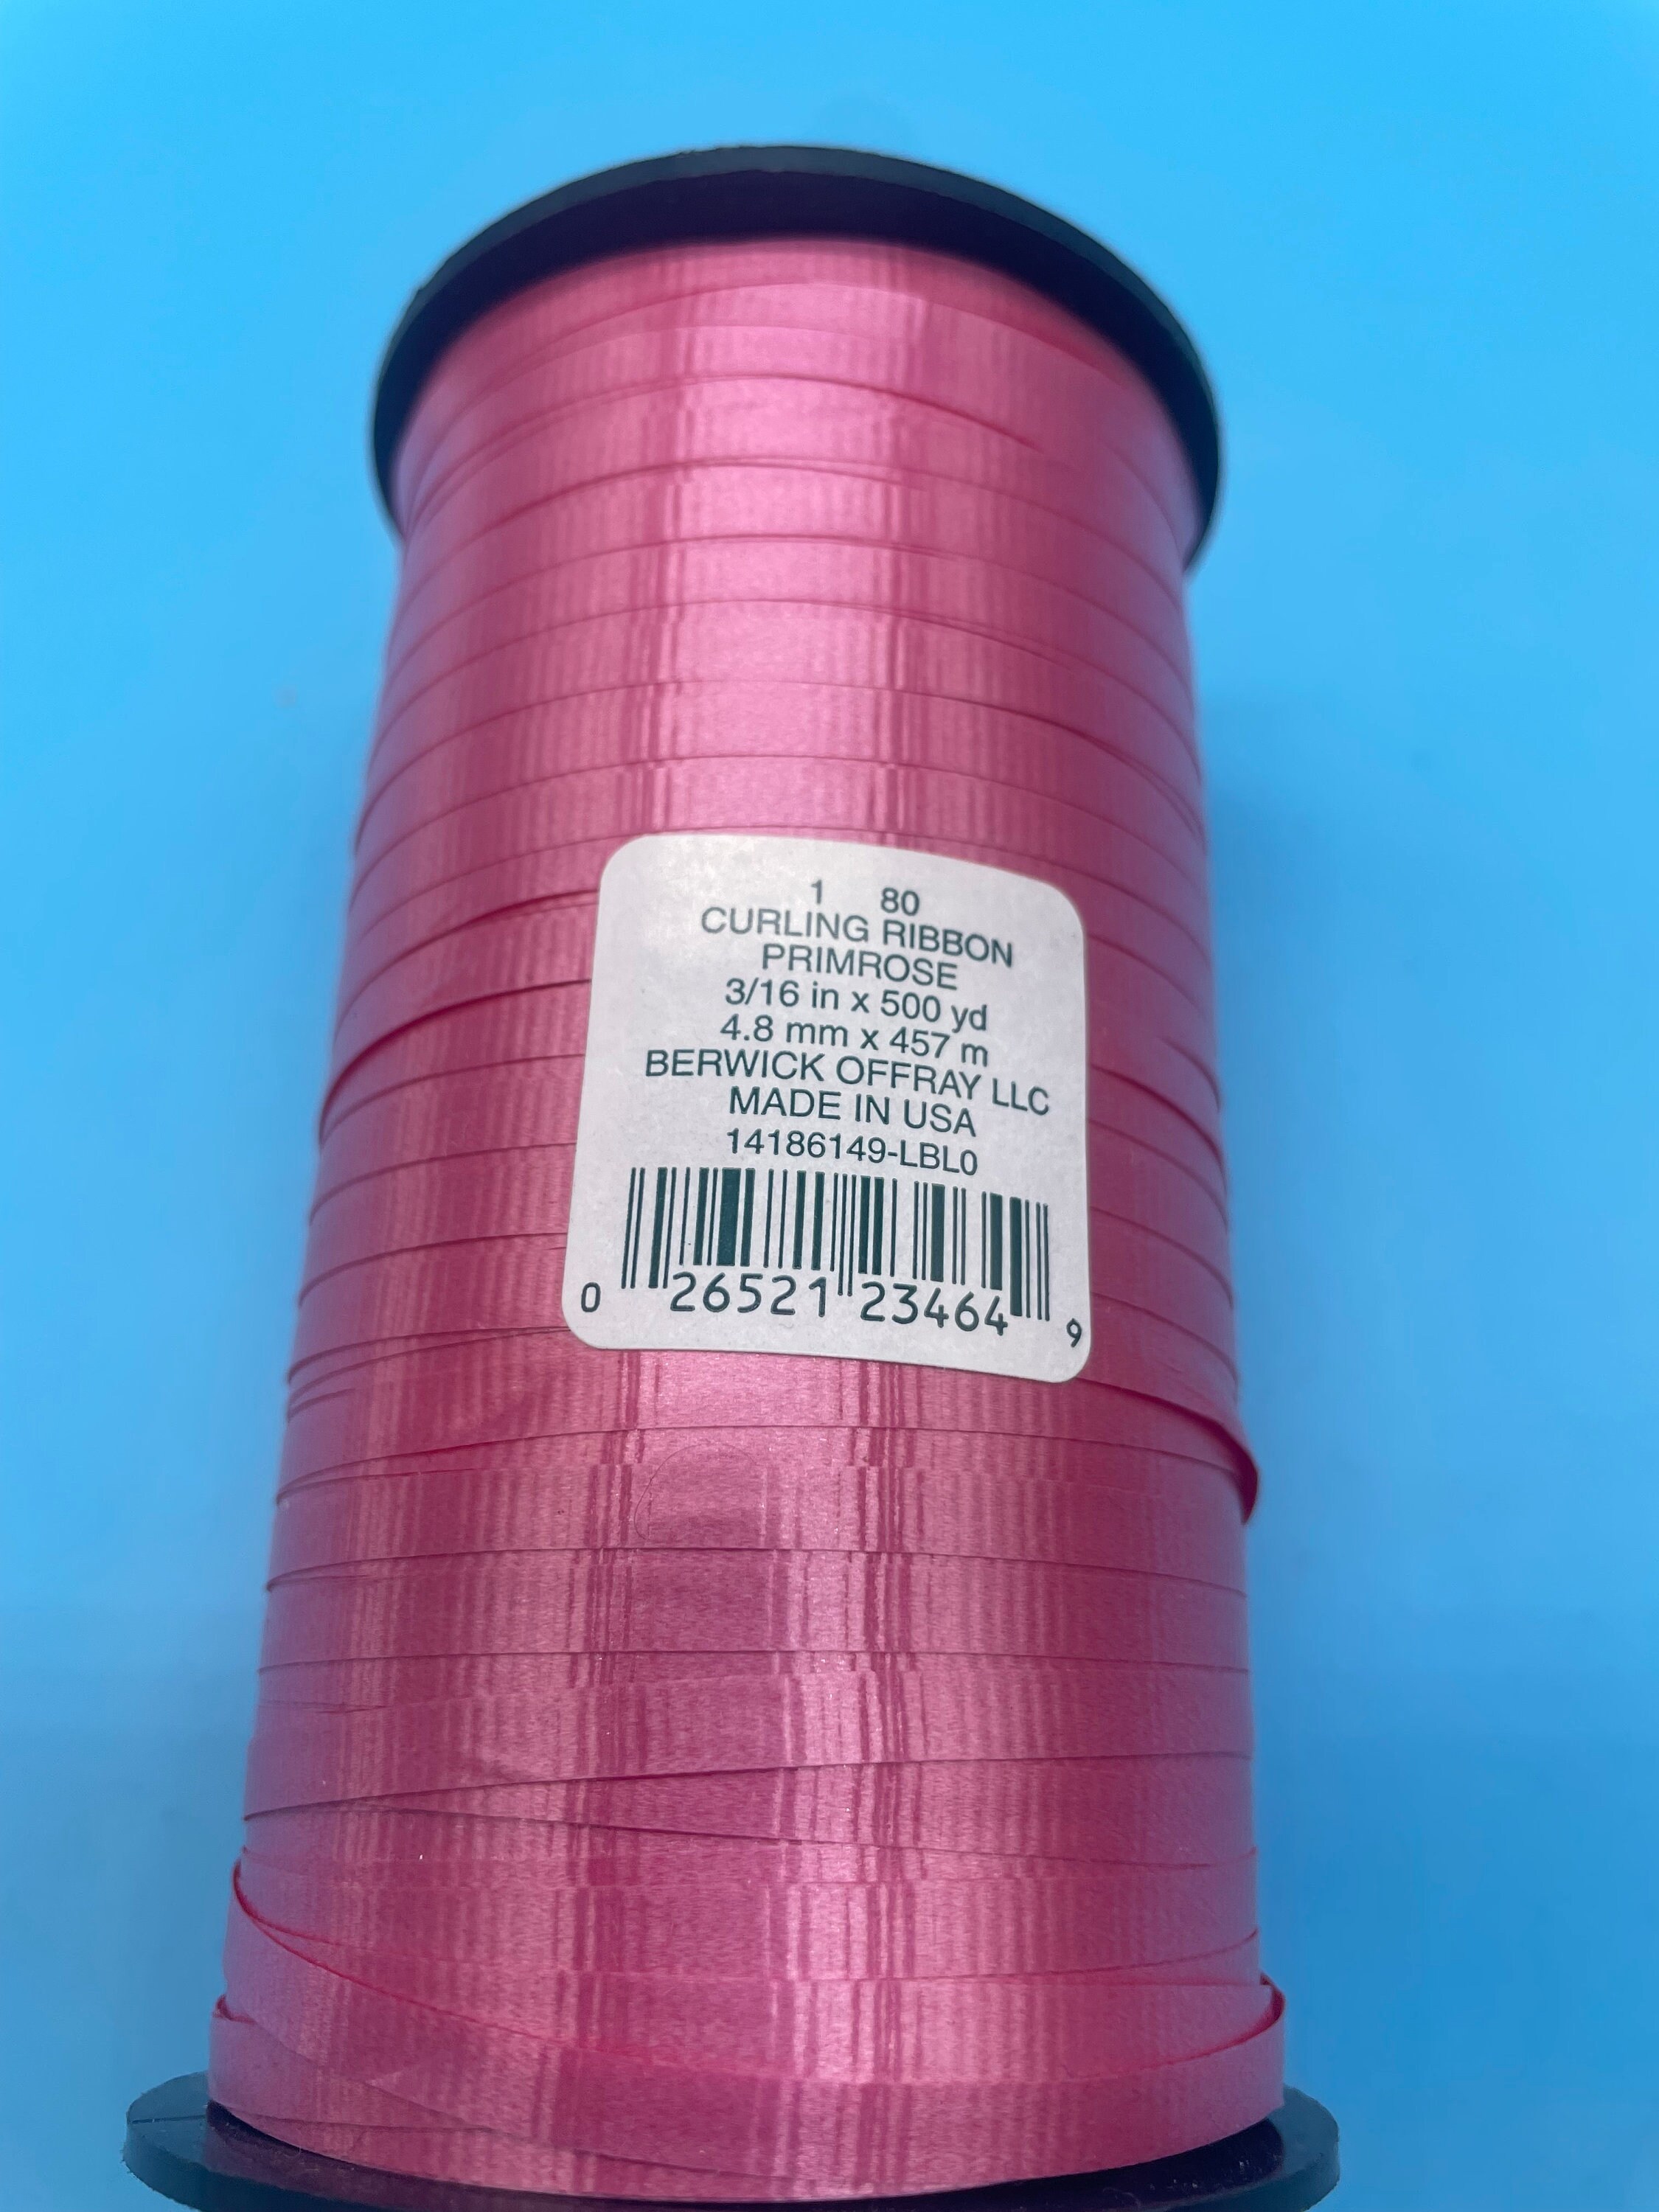 Curling Ribbon Spool Crimped 3/16 500 Yards 1500 Feet, Offering 27